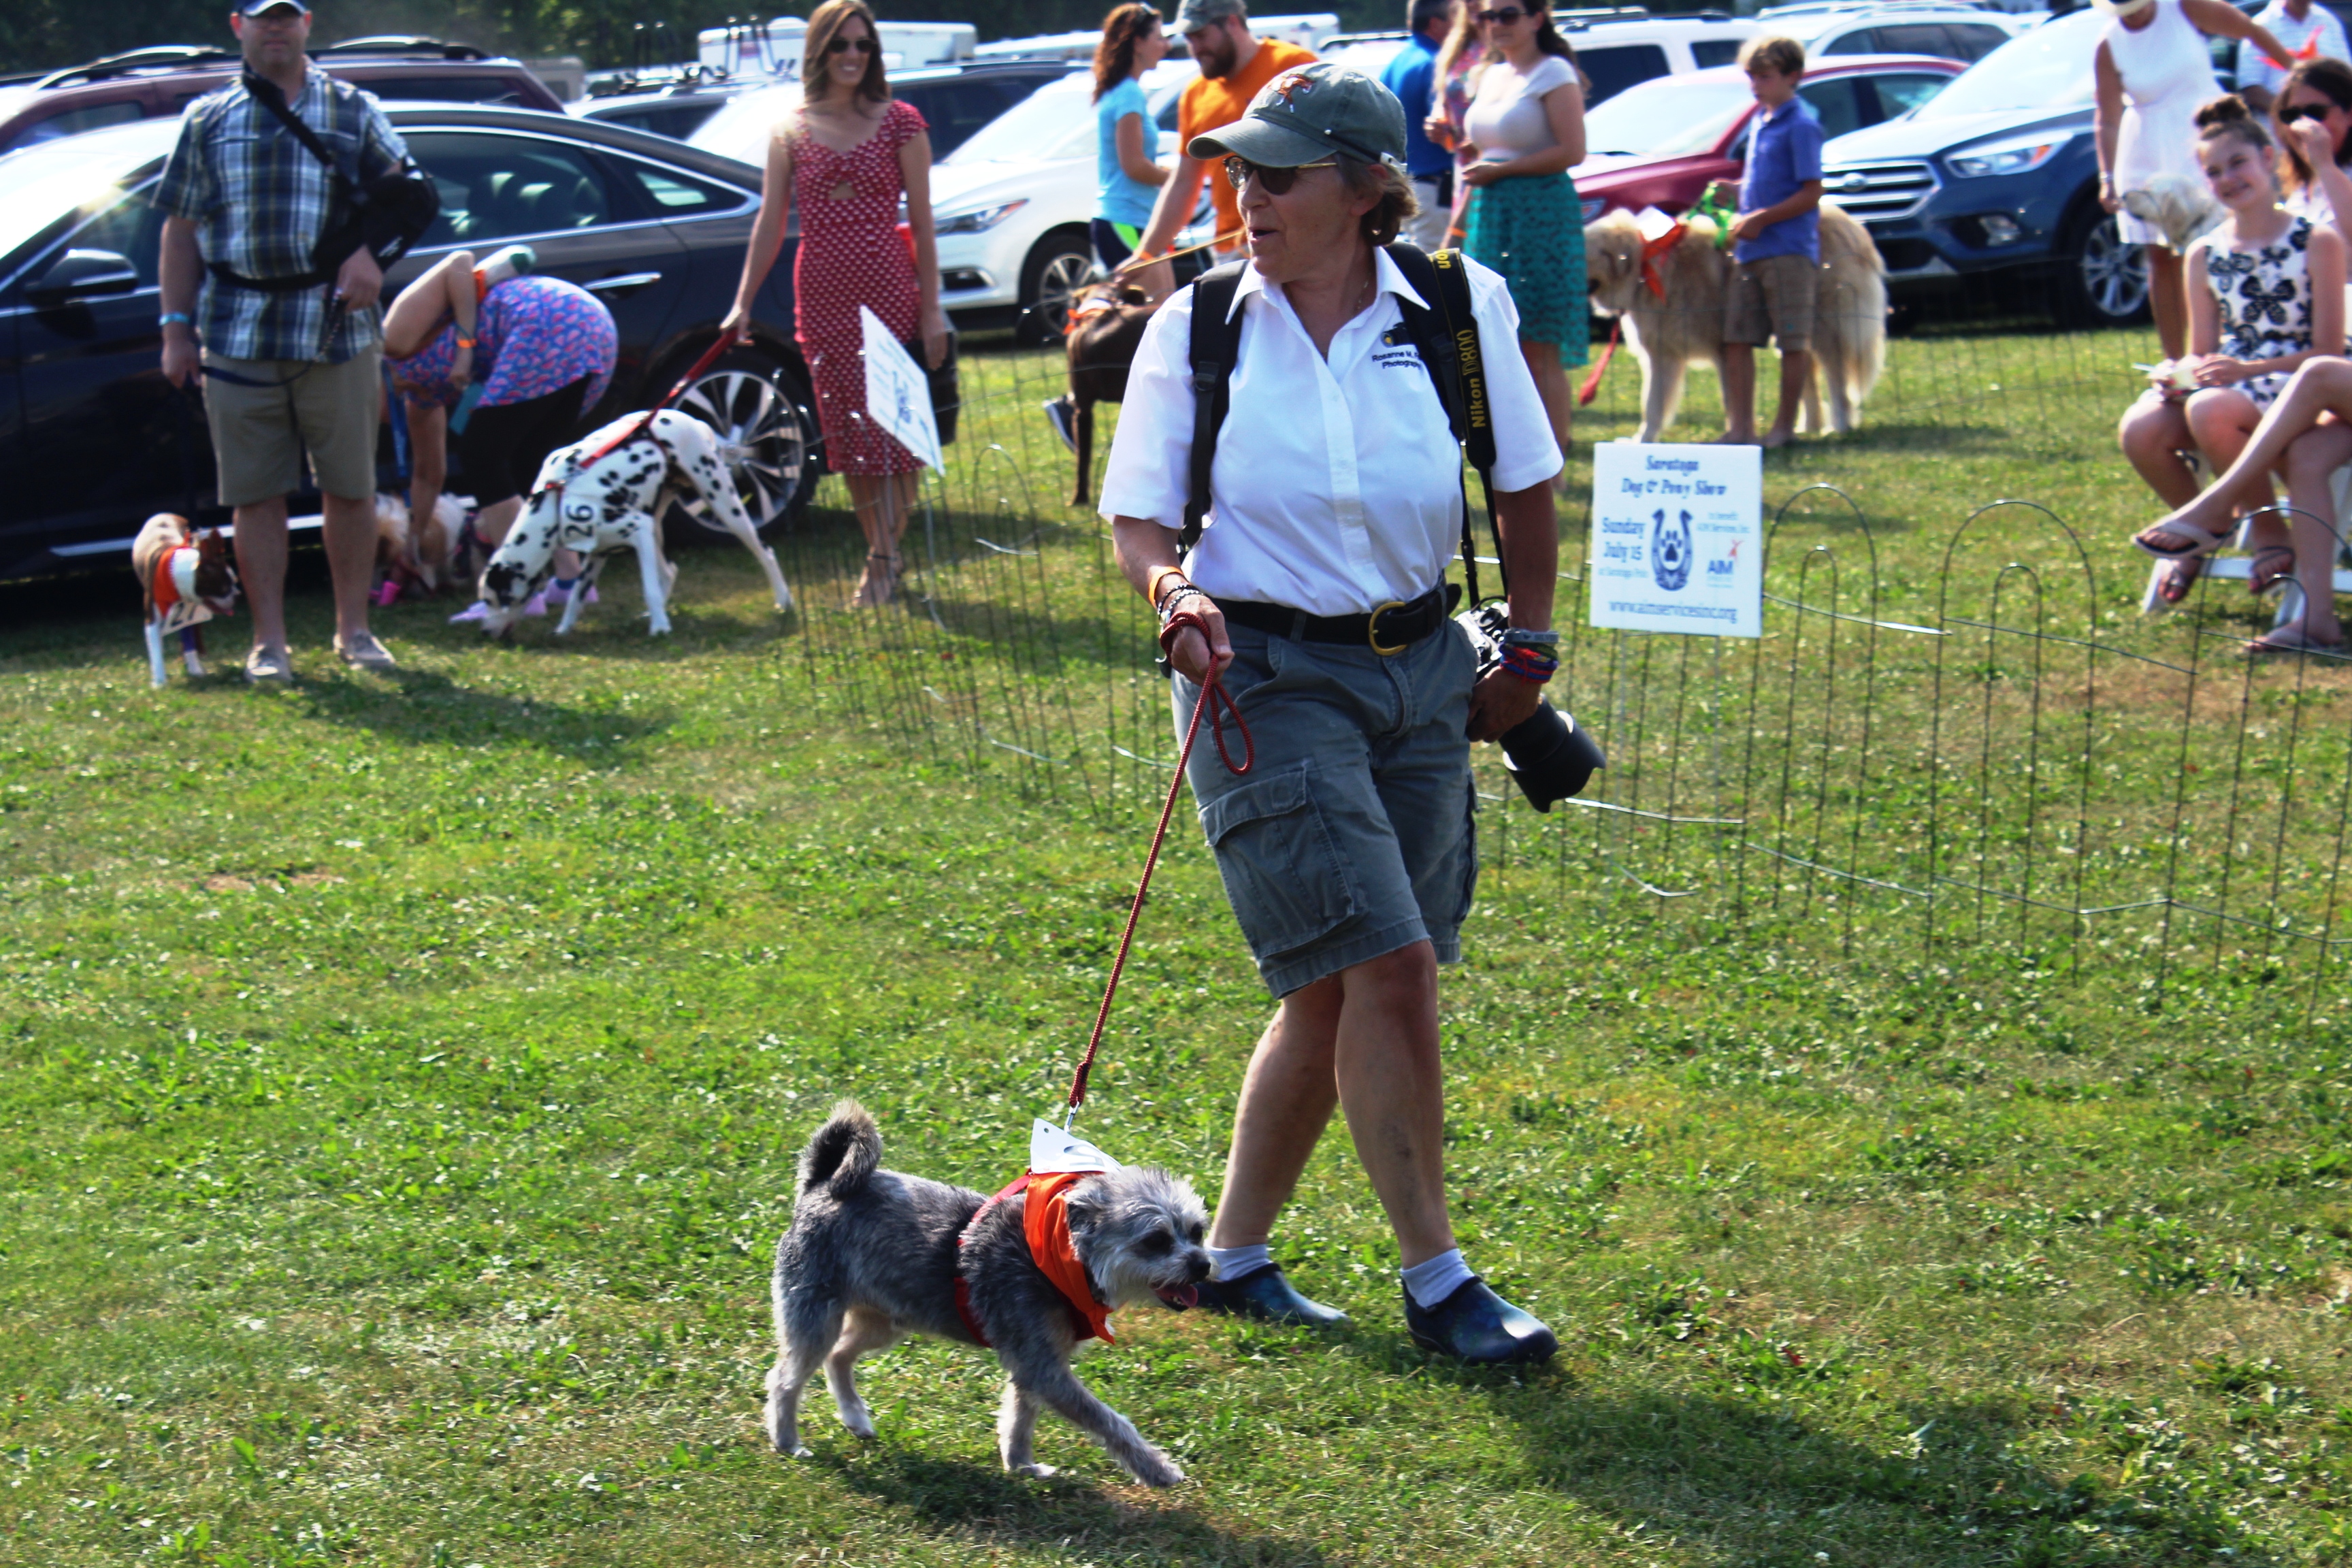 Woman with large camera walking small dog at the Saratoga Dog & Pony Show to benefit AIM Services, Inc.